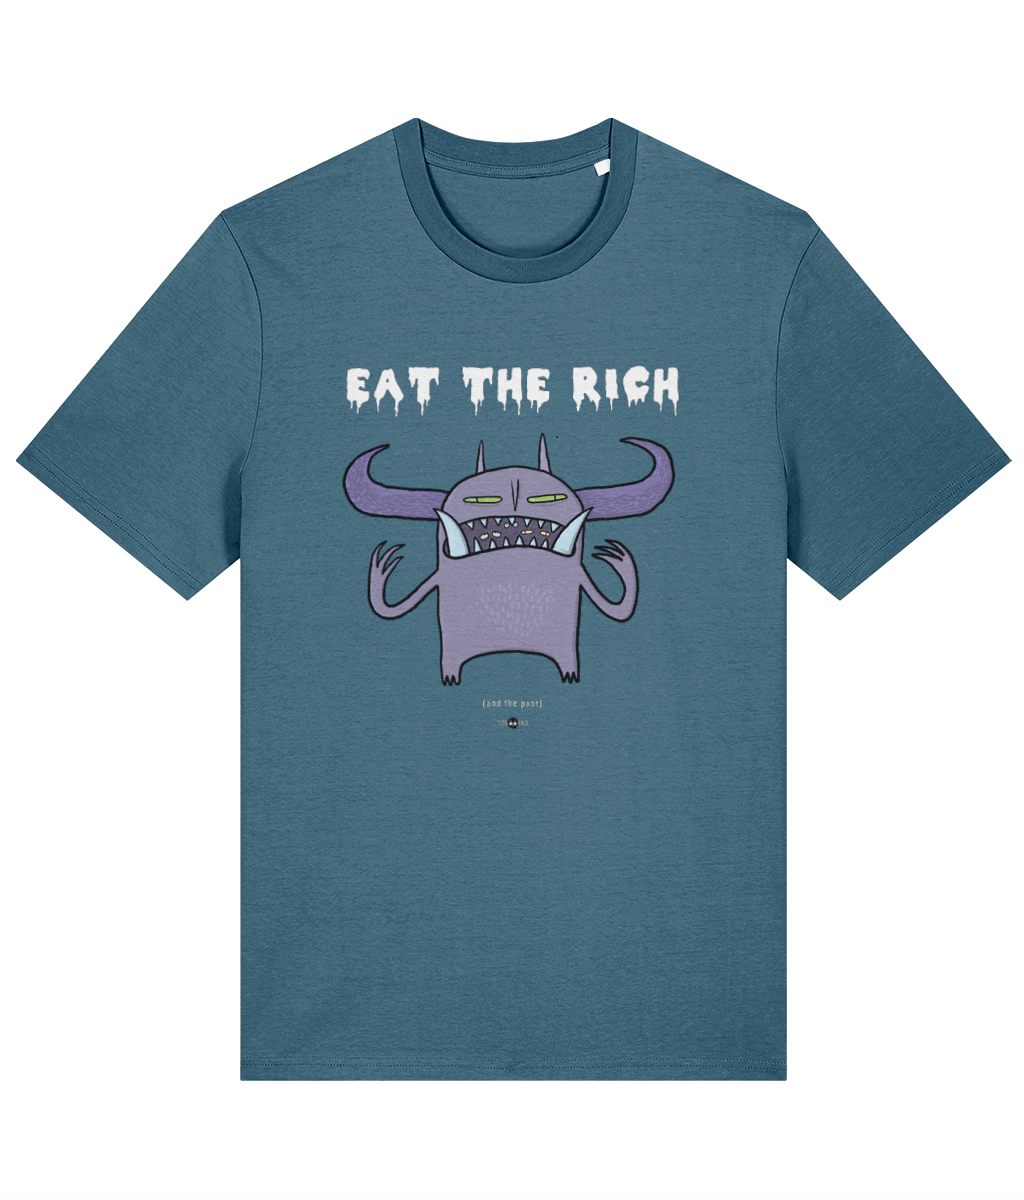 Eat The Rich (And the poor) - Tussface T-shirt